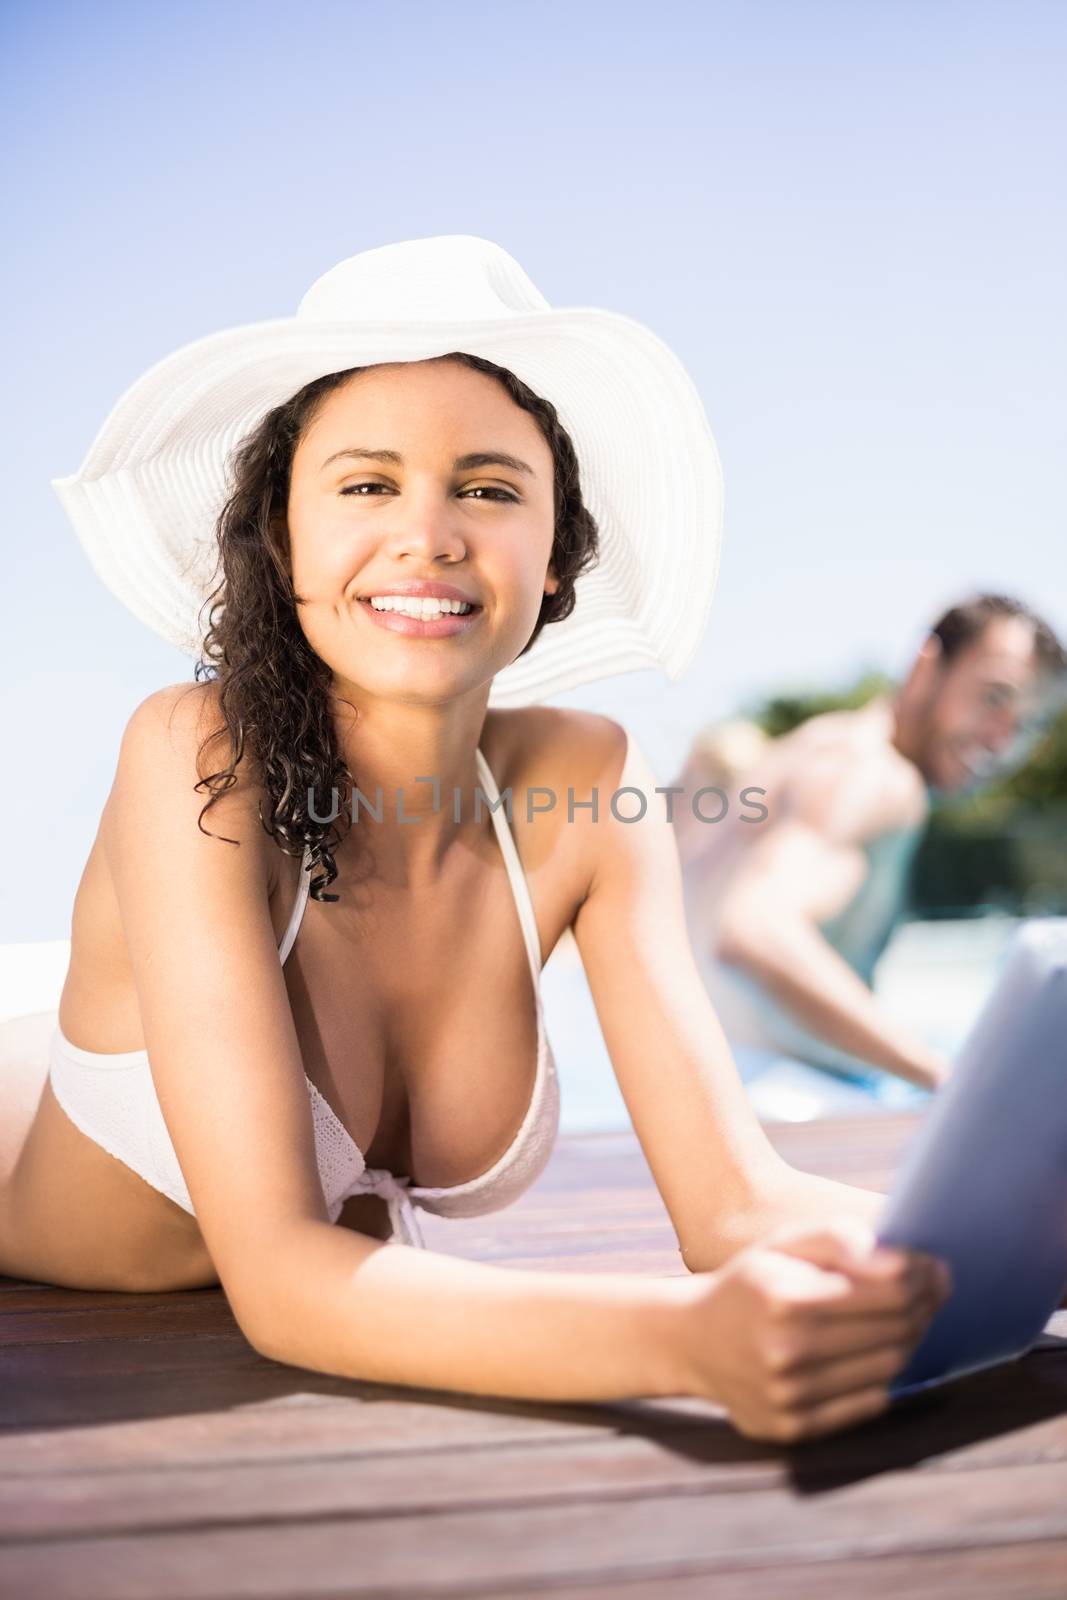 Portrait of happy woman in hat using digital tablet by pool side on a sunny day